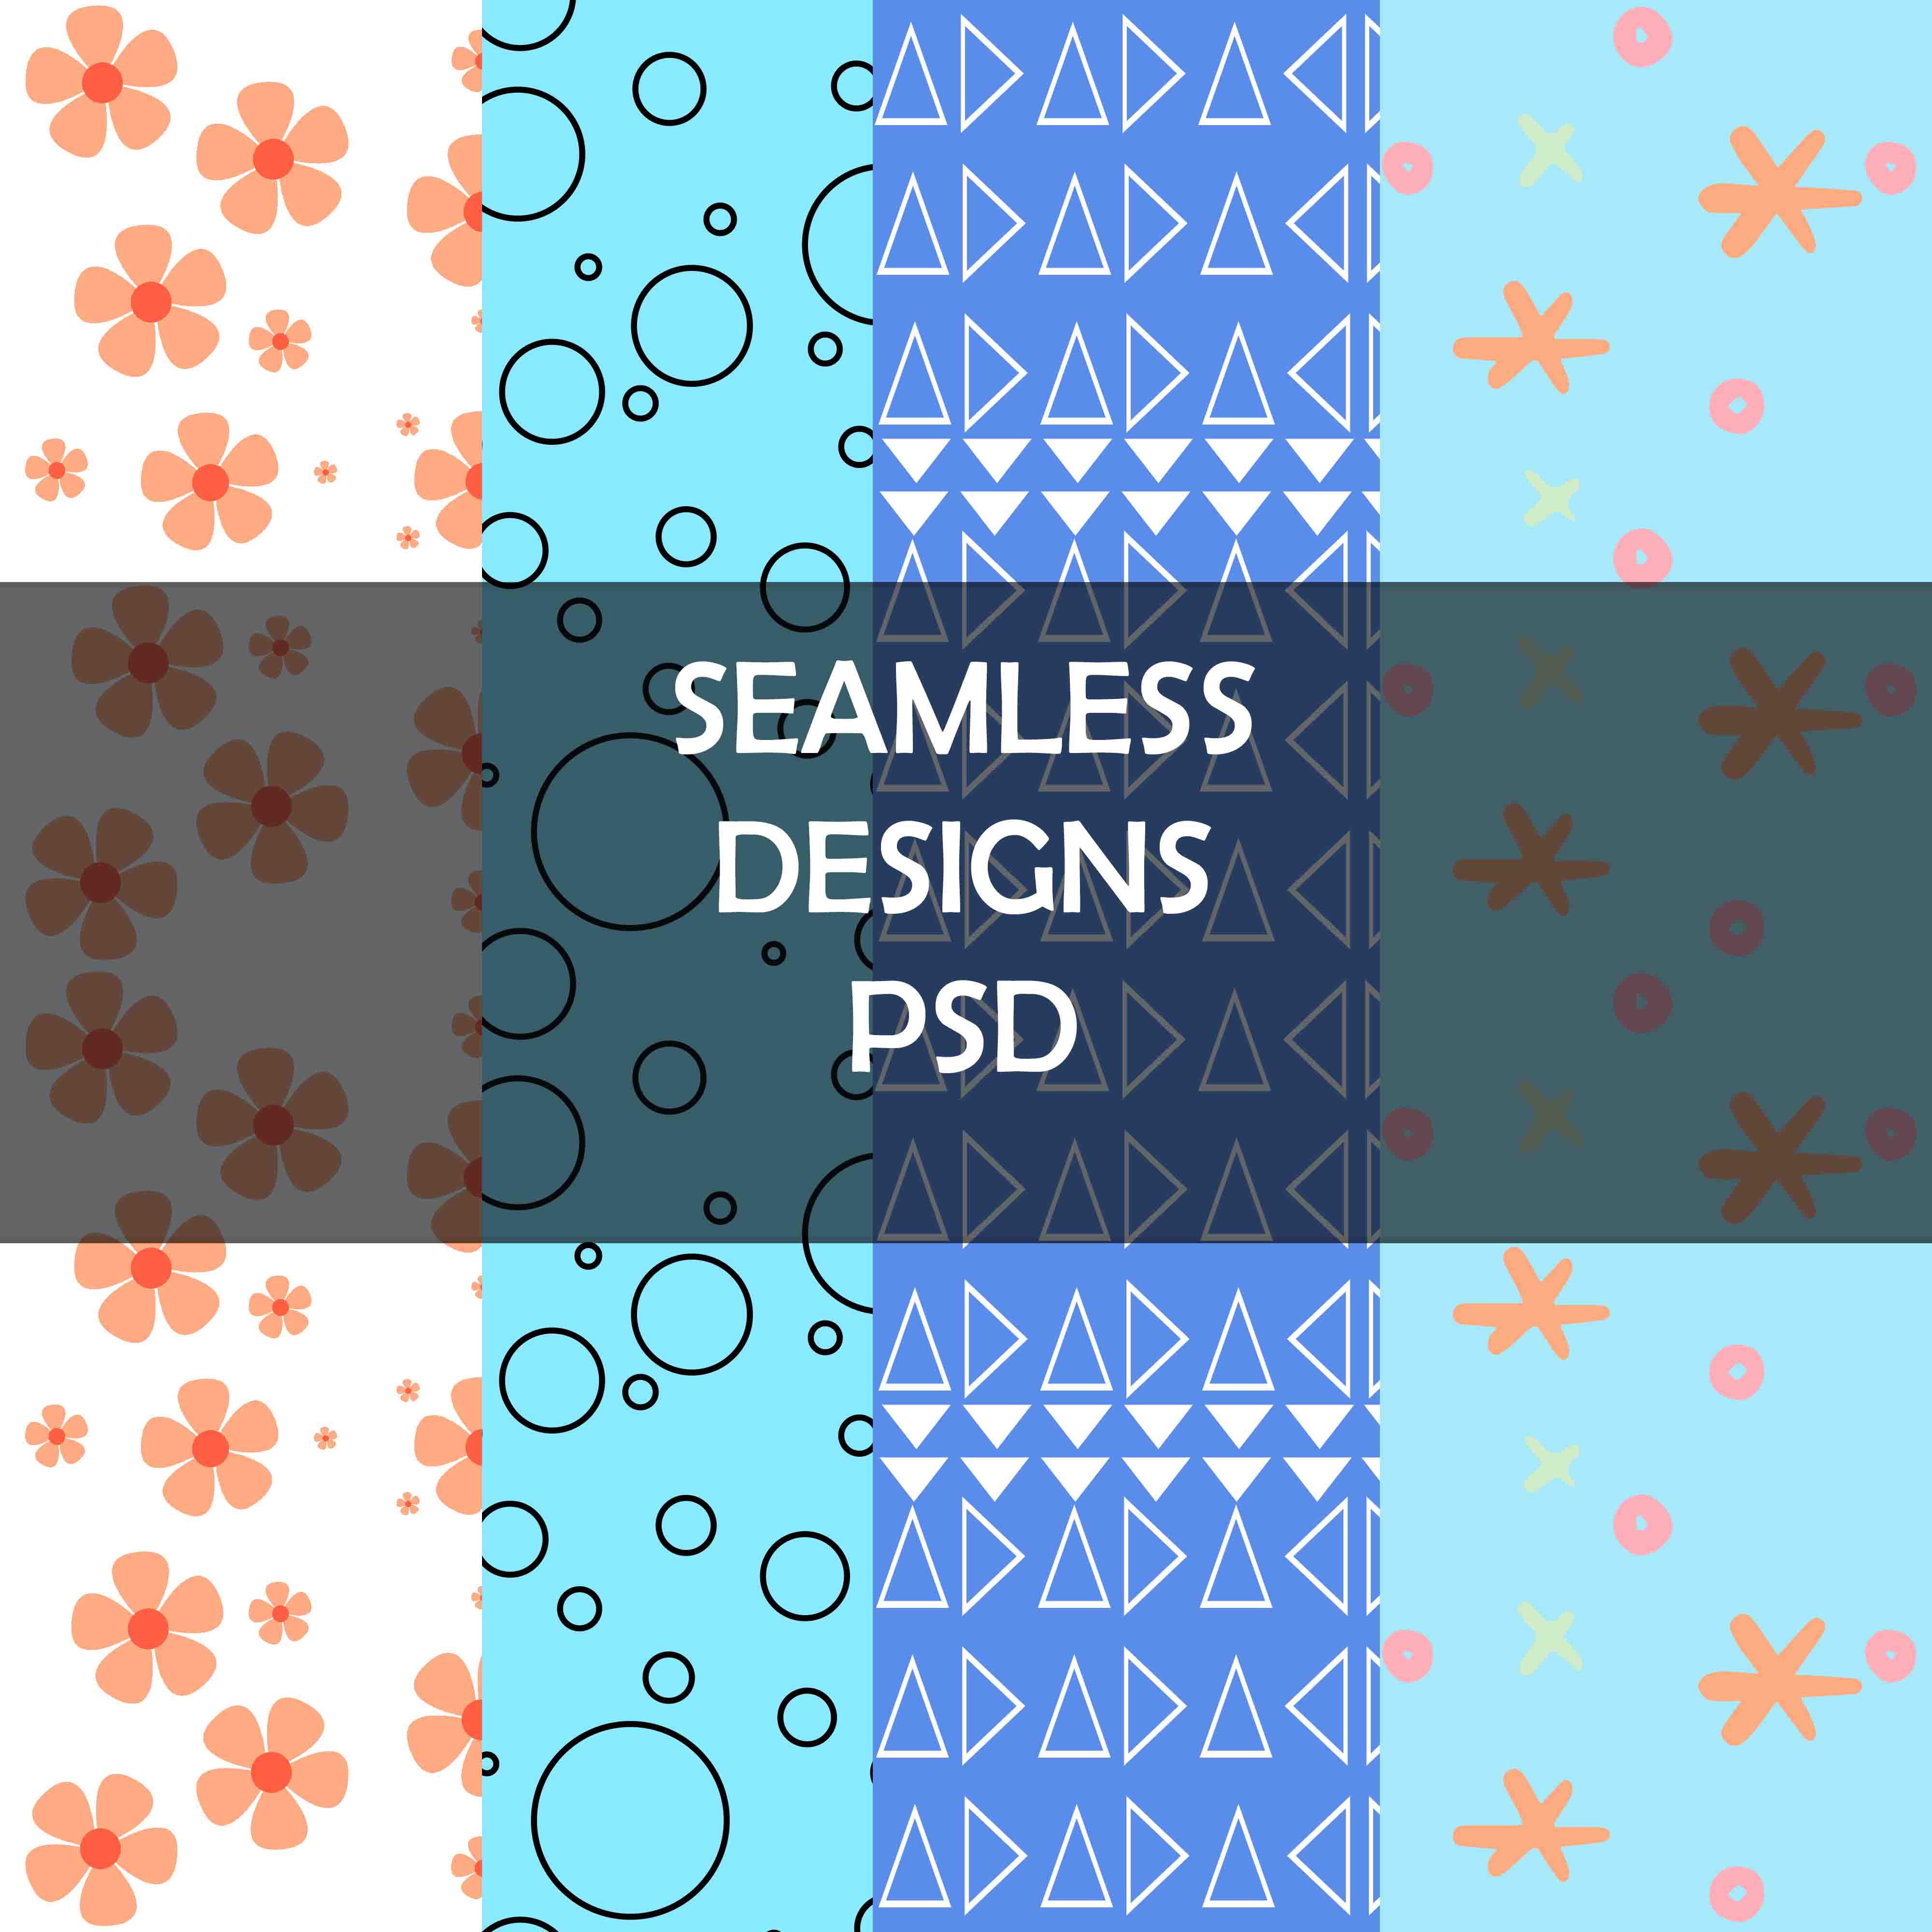 SEAMLESS DESIGN SHAPES cover image.